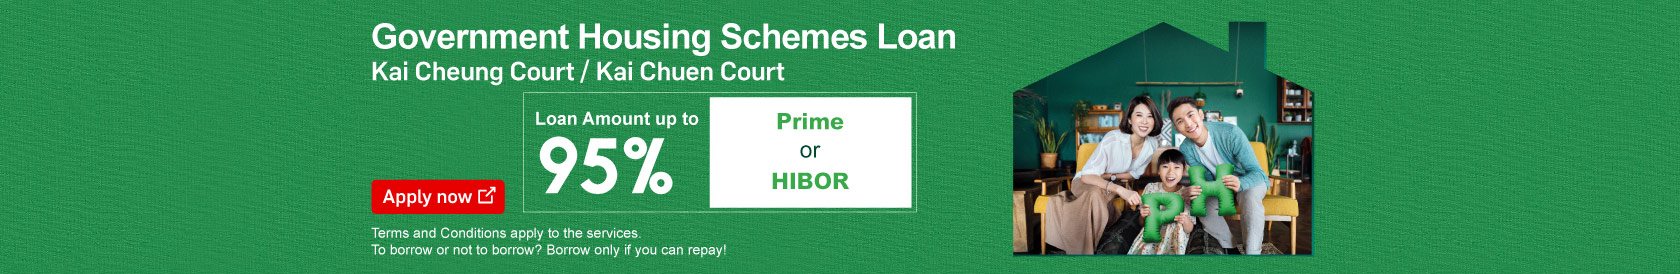 Government Housing Schemes Loan